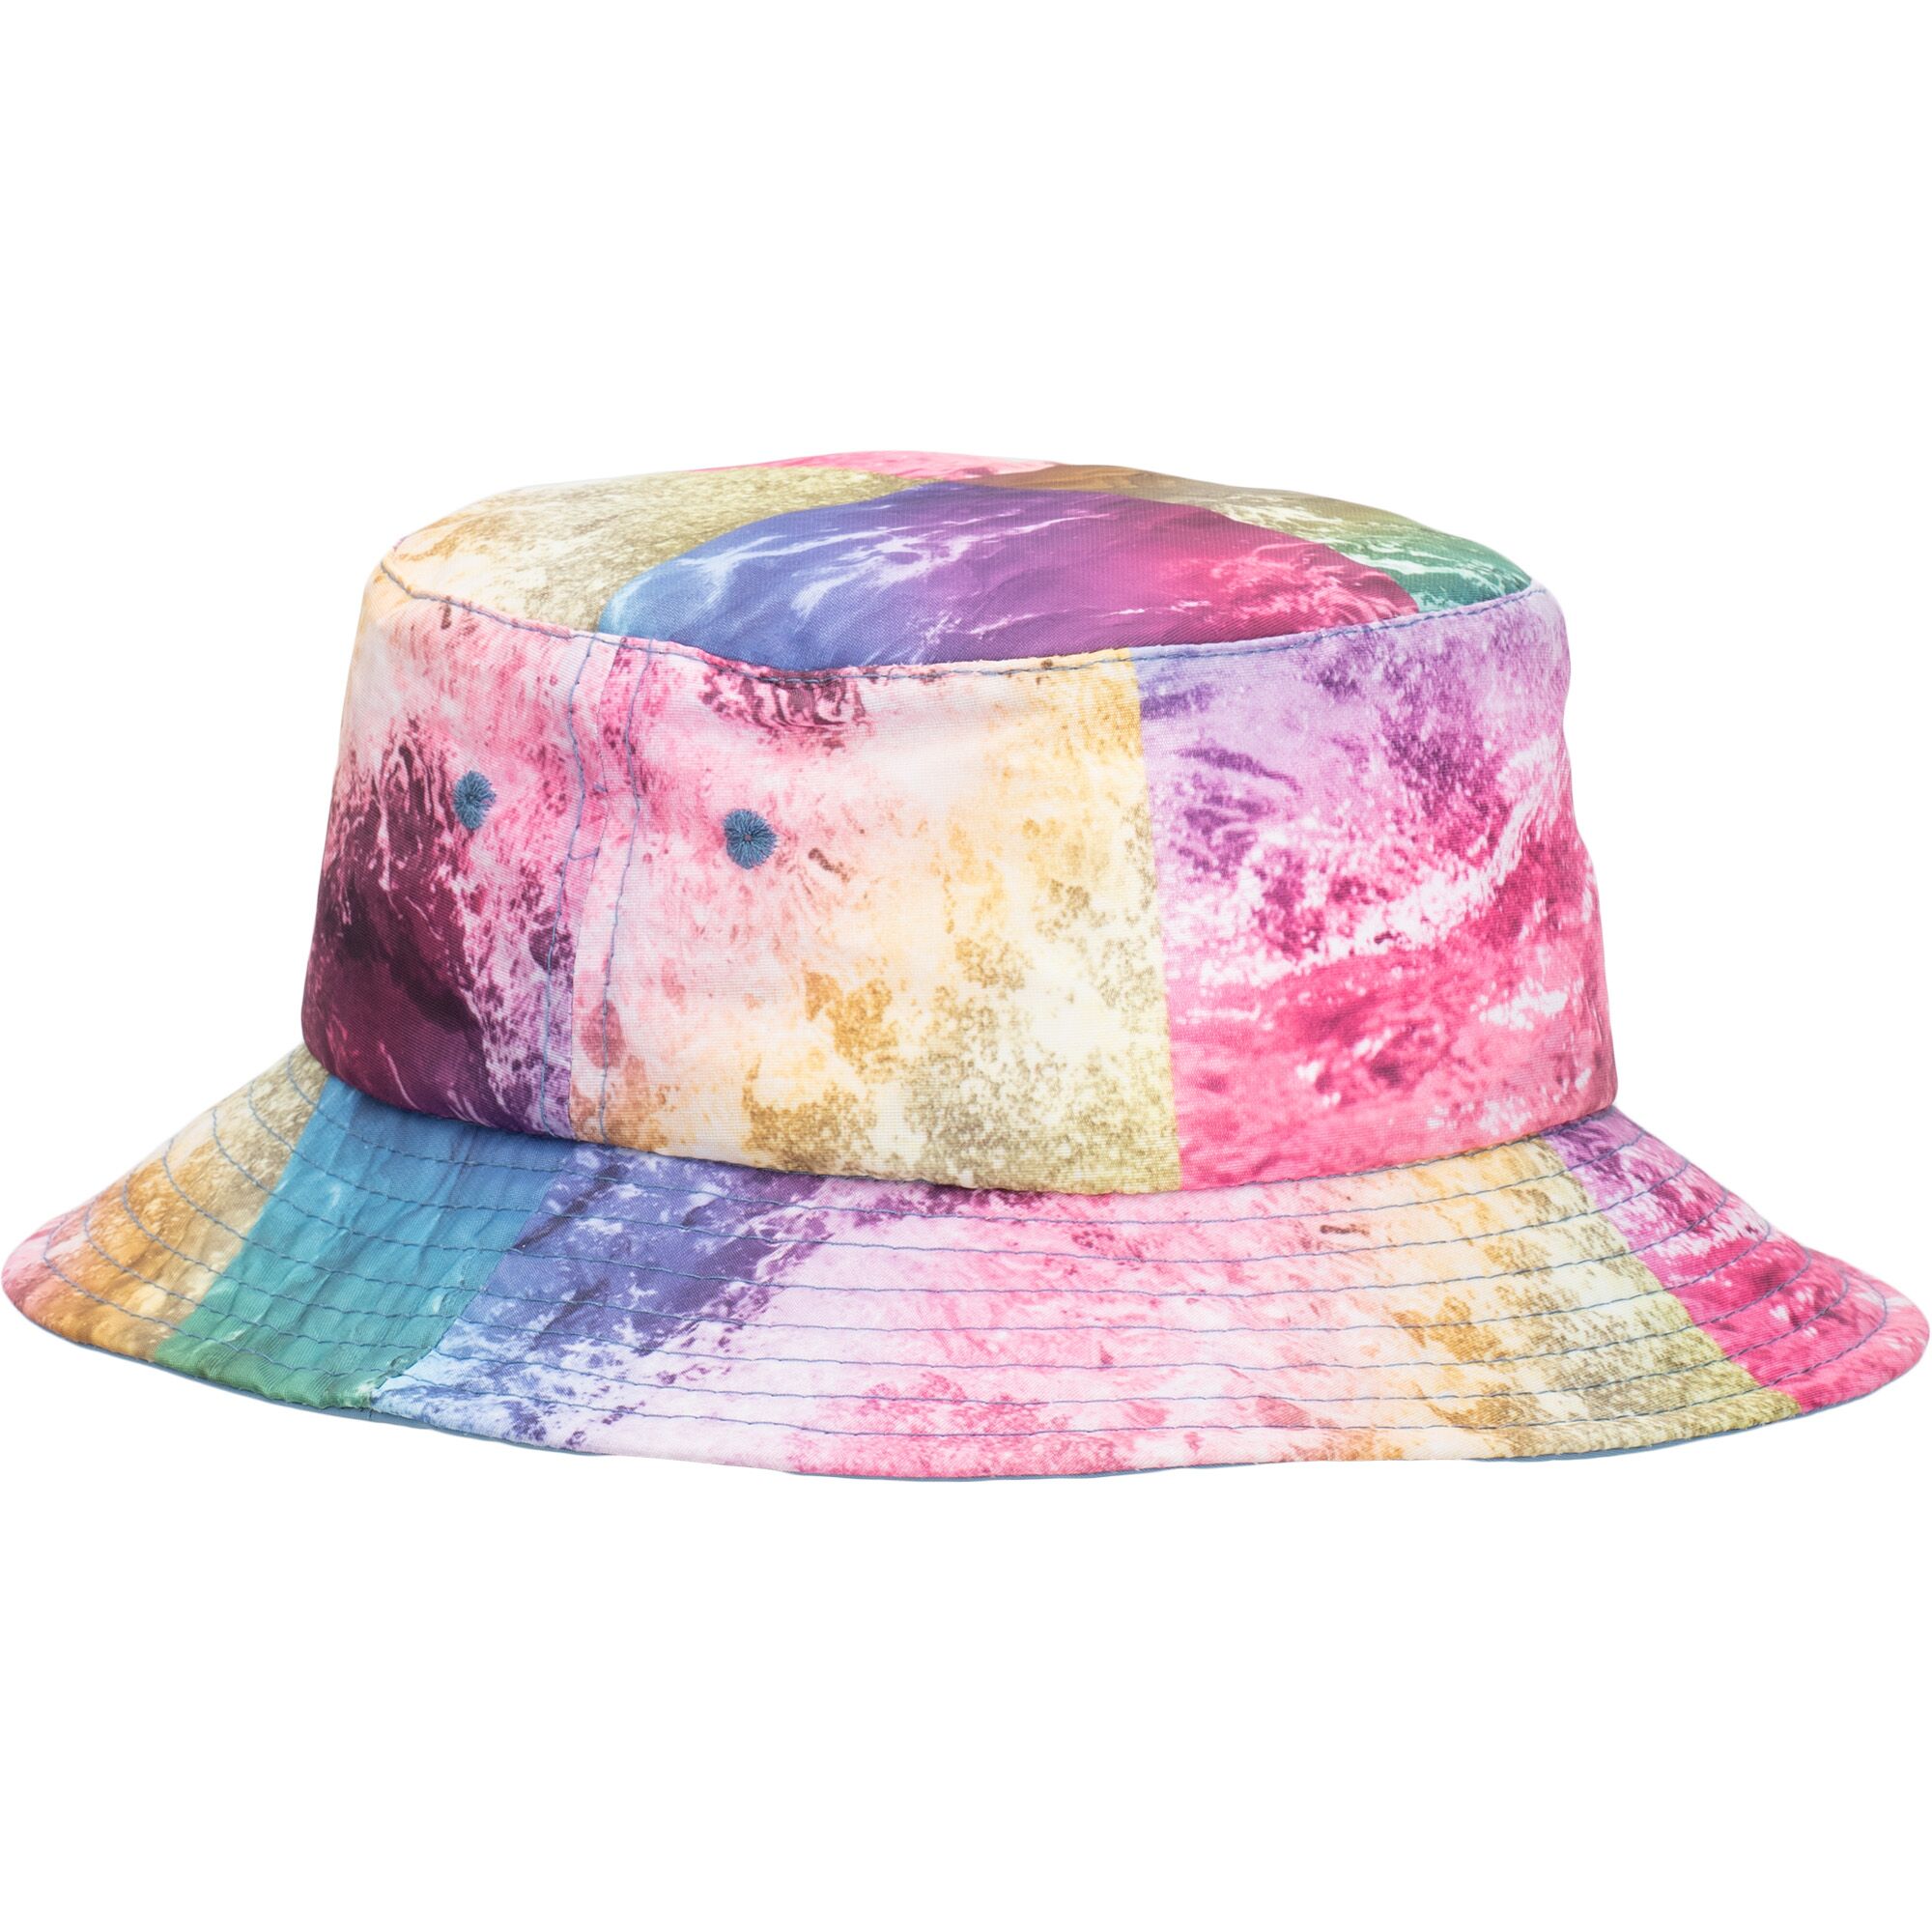 Youth Tie Dyed Bucket Hat - Sizes M-L